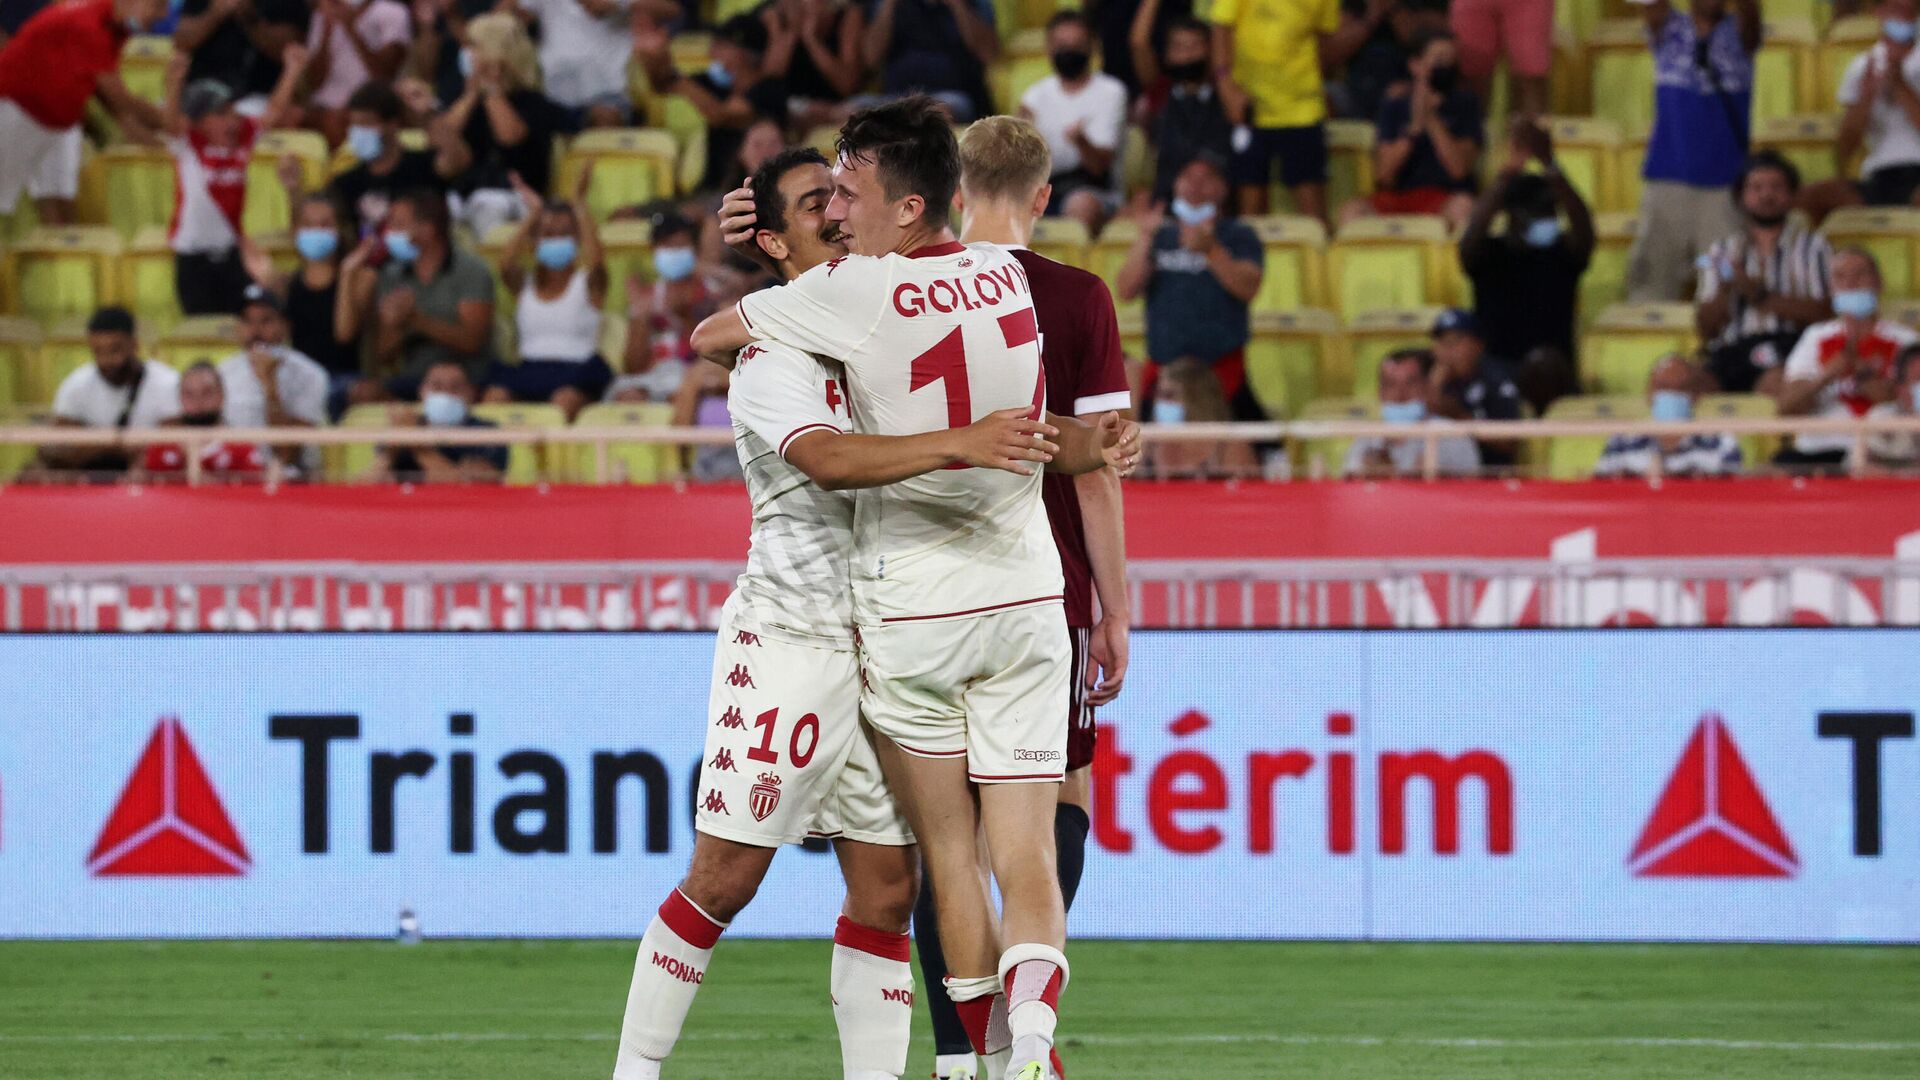 Monaco's Russian midfielder Aleksandr Golovin (C) celebrates after he scored a second goal during the Champions League match Q3 football match between AS Monaco and AC Sparta Praha at Louis II stadium in Monaco, on August 10, 2021. (Photo by Valery HACHE / AFP) - РИА Новости, 1920, 10.08.2021